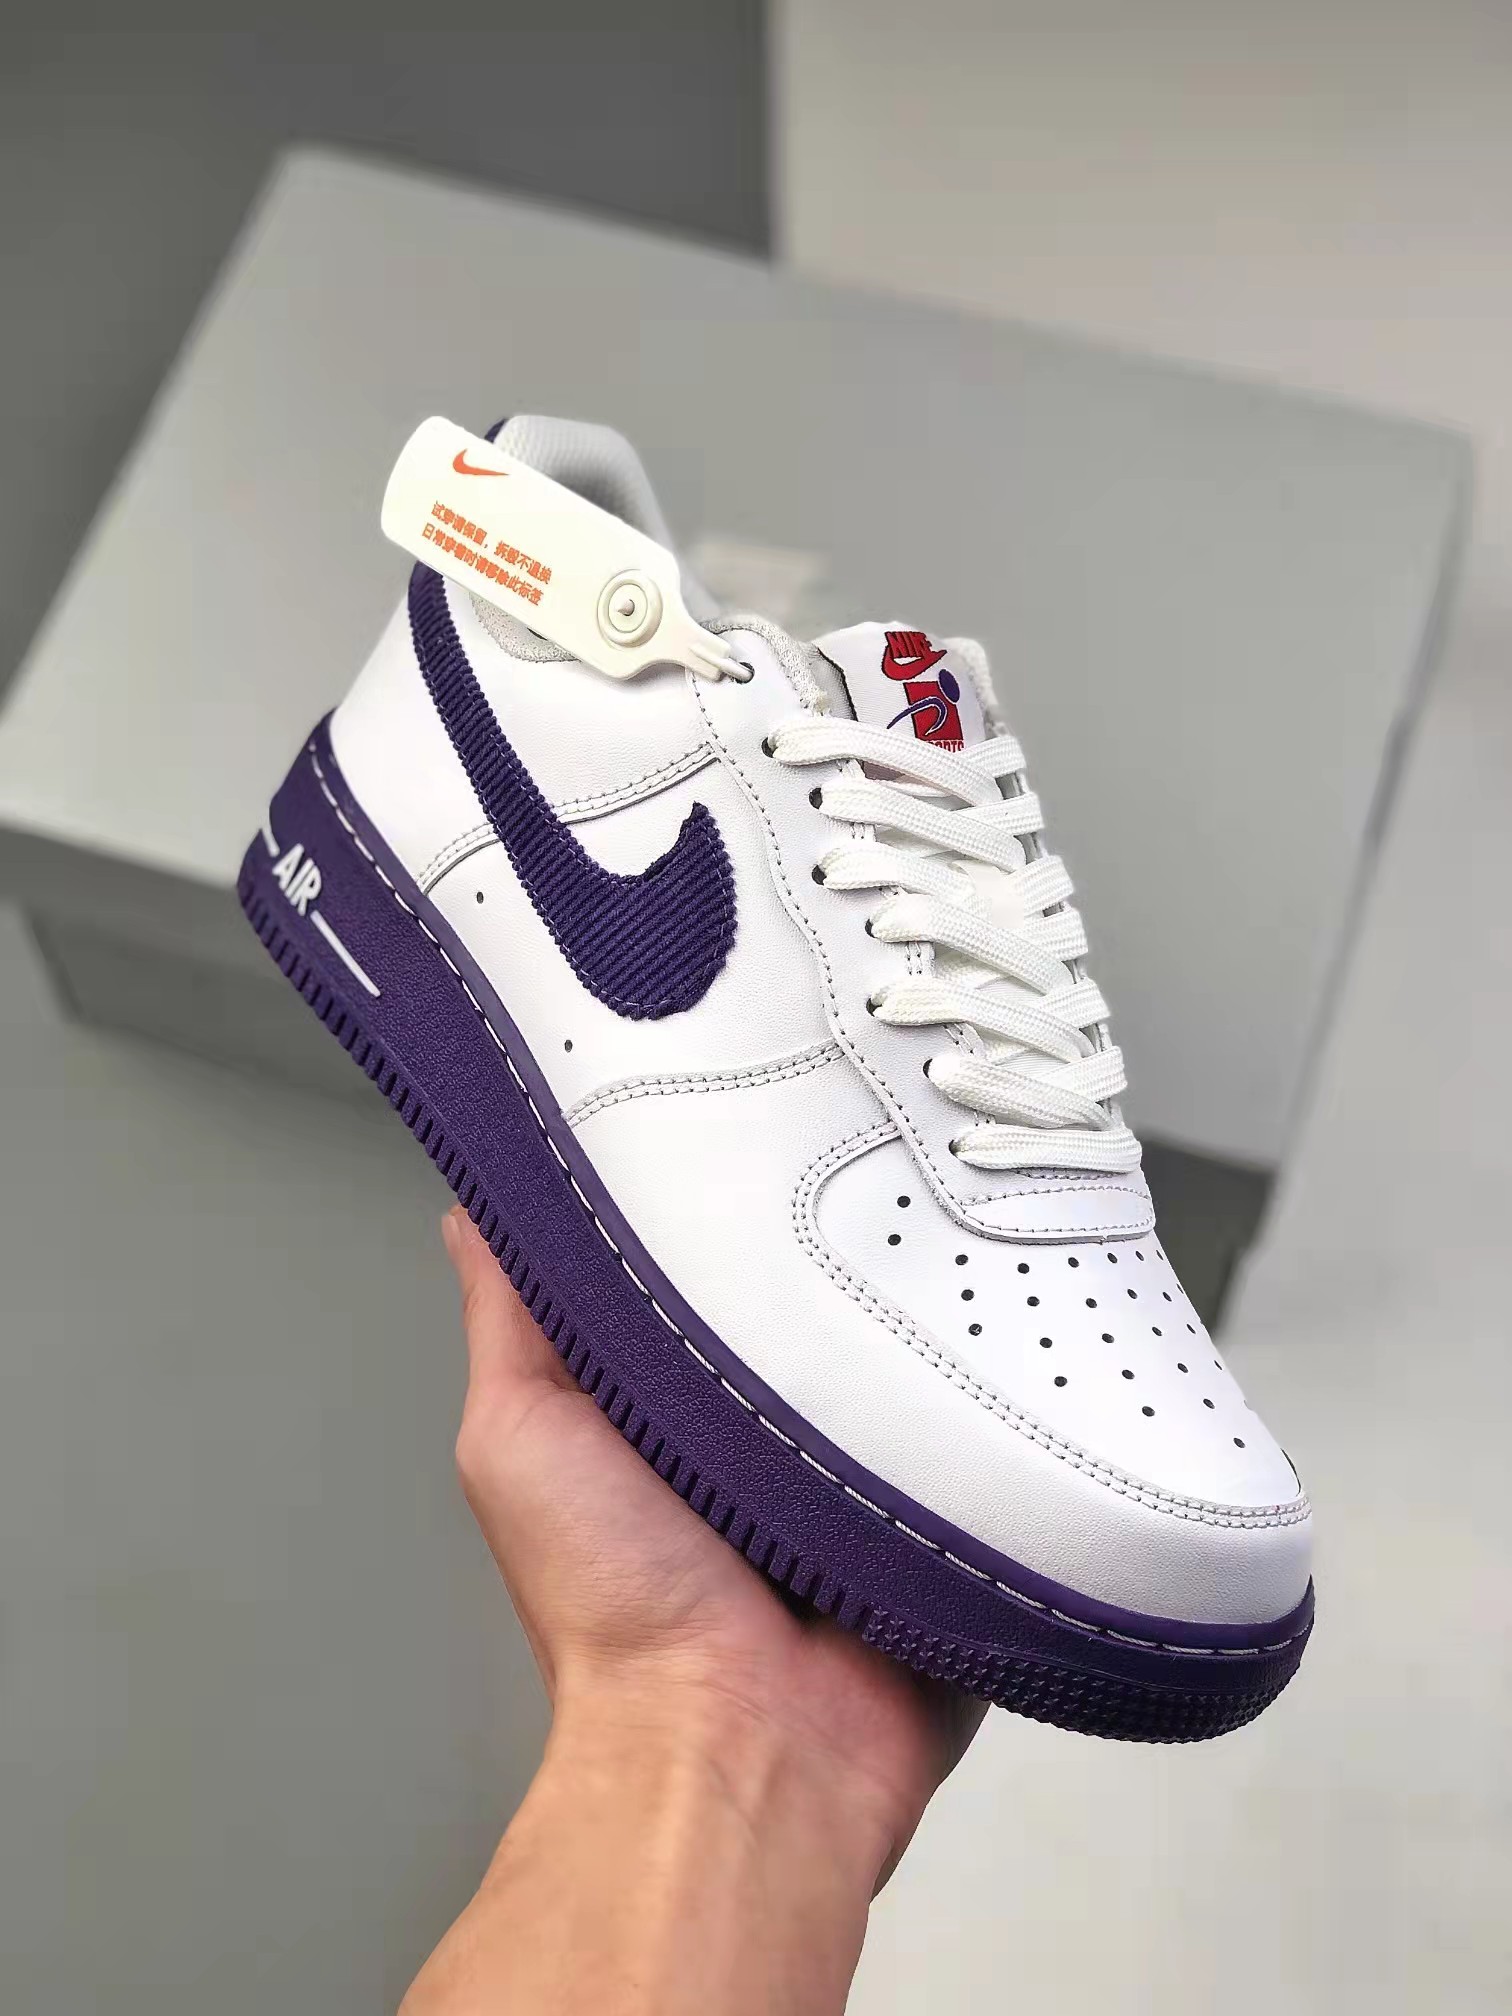 Nike Air Force 1 '07 LV8 EMB 'White Court Purple' DB0264-100 - Limited Edition Sneakers.